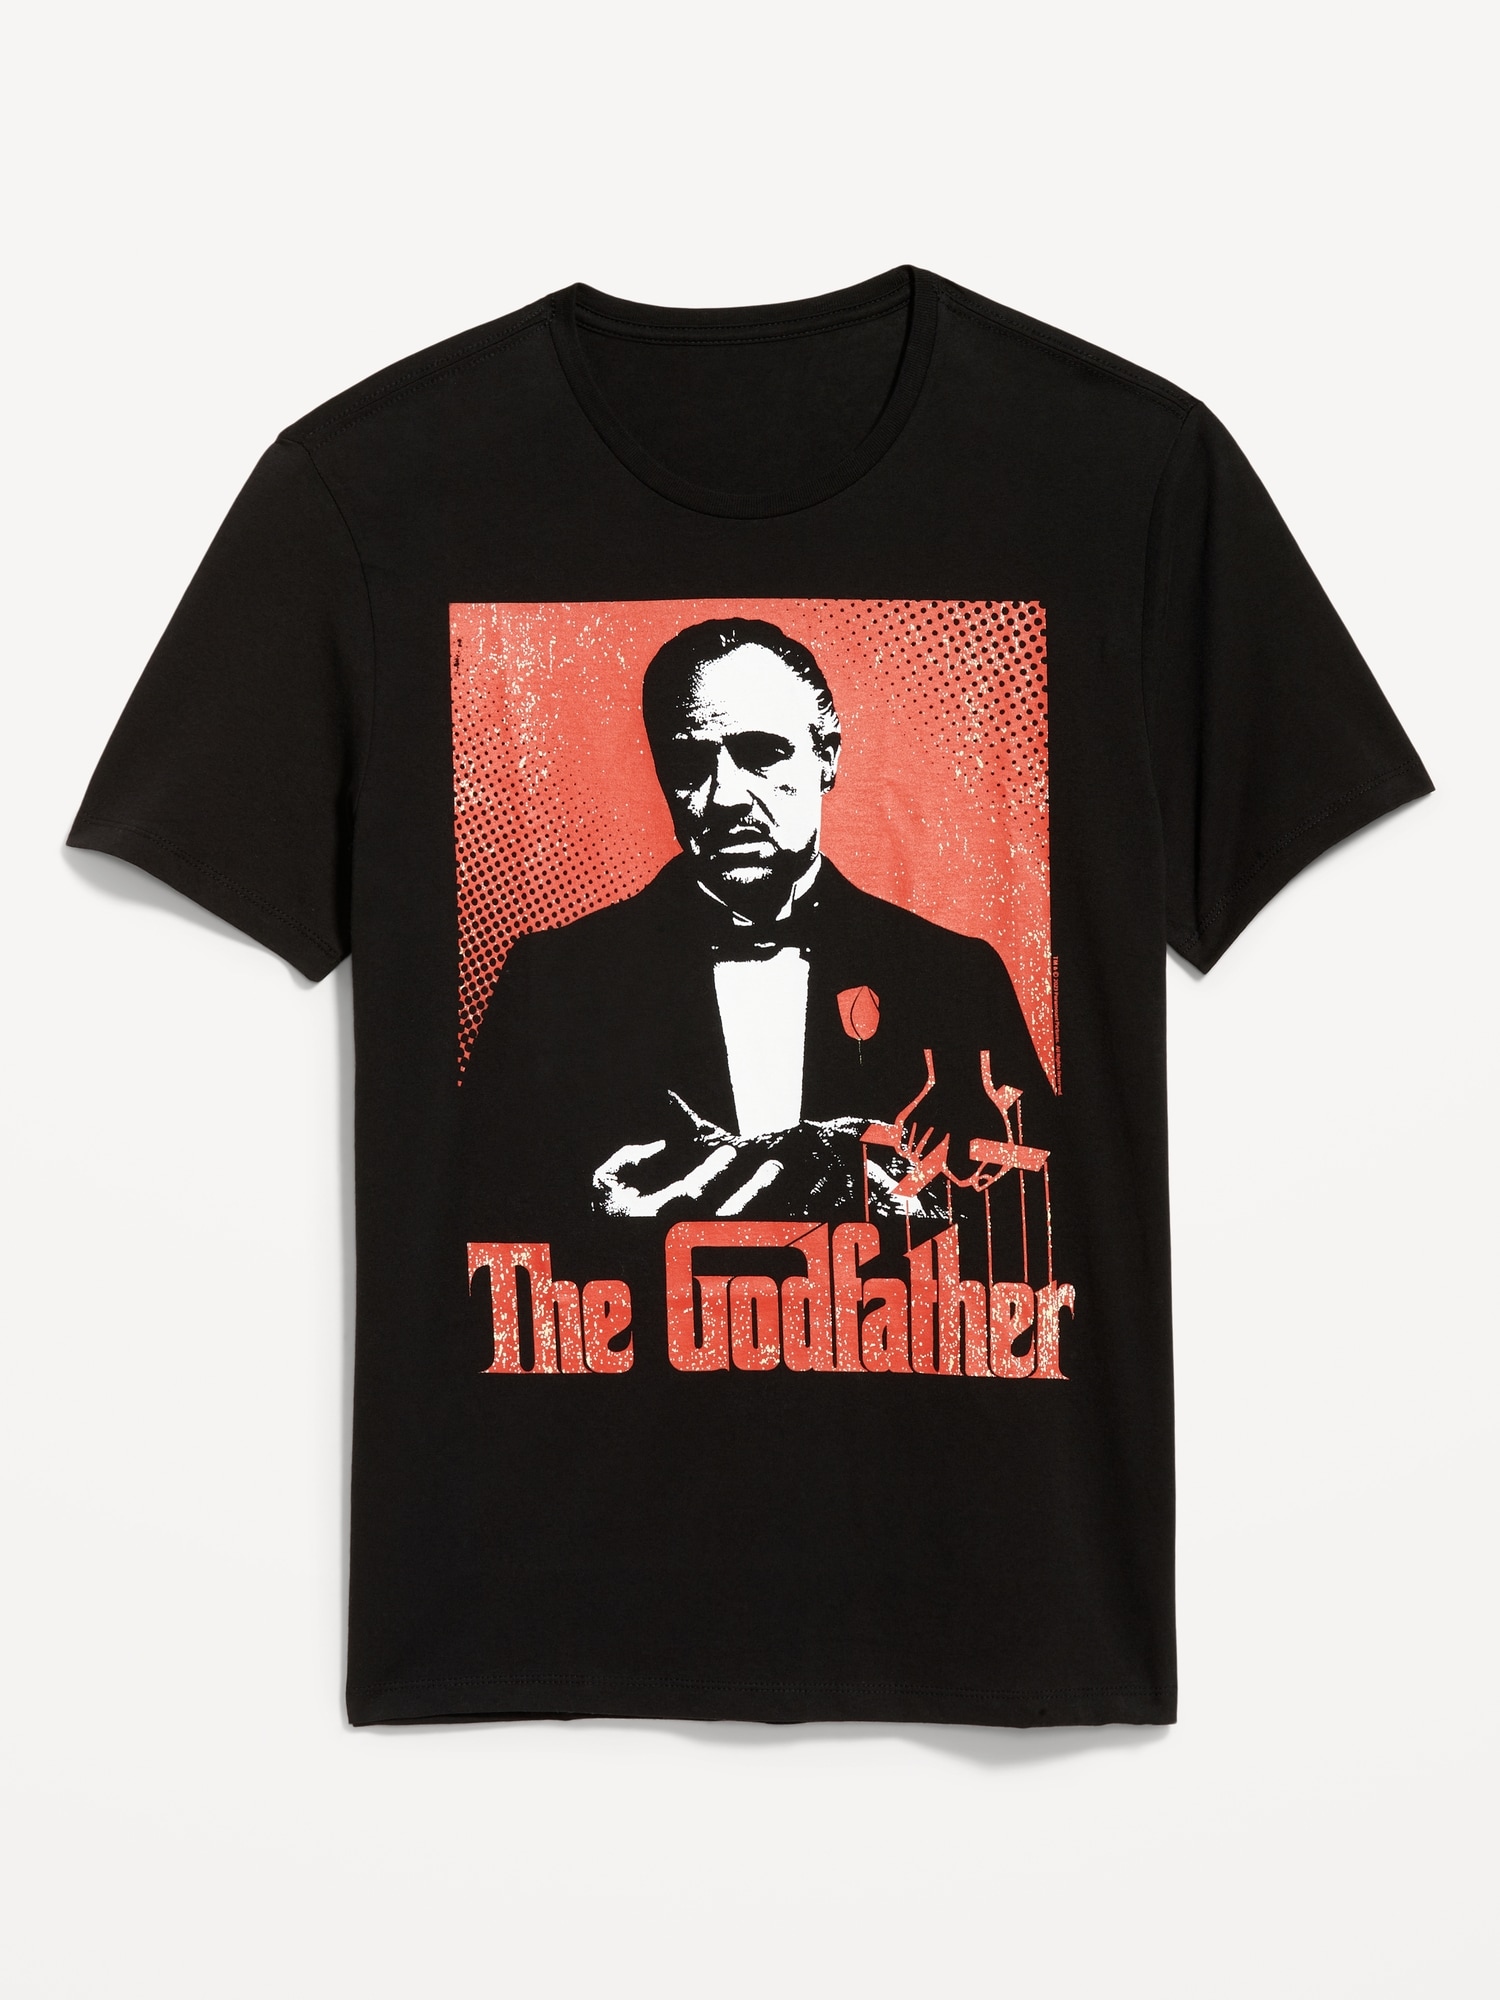 The Godfather™ T-Shirt